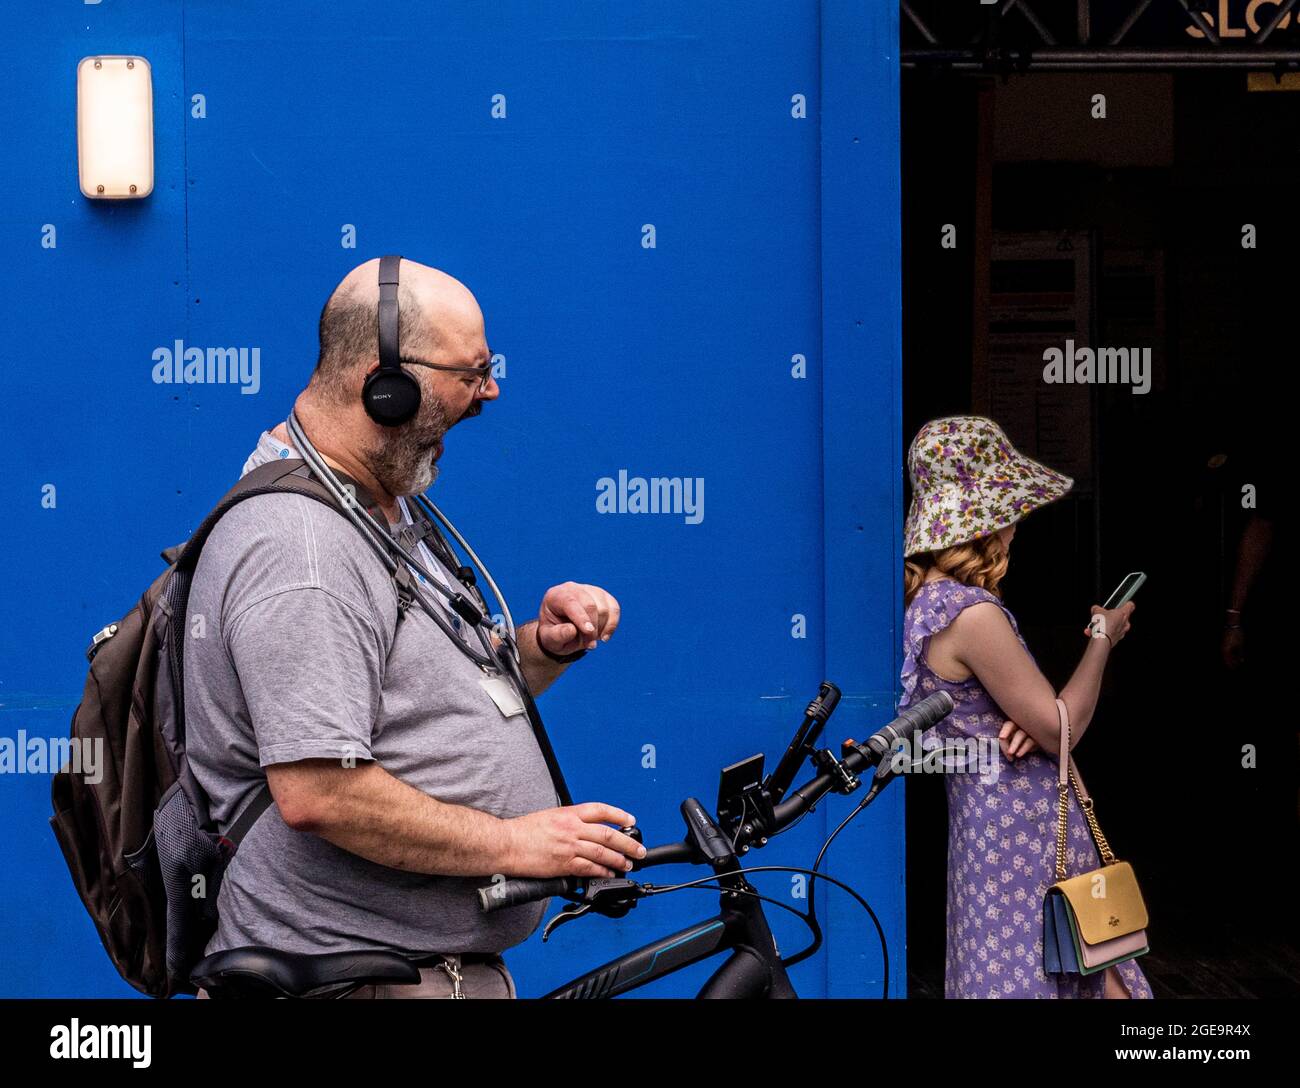 A man wearing a bike lock around his neck yawns really widely against the background of a blue door with a woman leaning on it in Sloane Square in Central London. Stock Photo